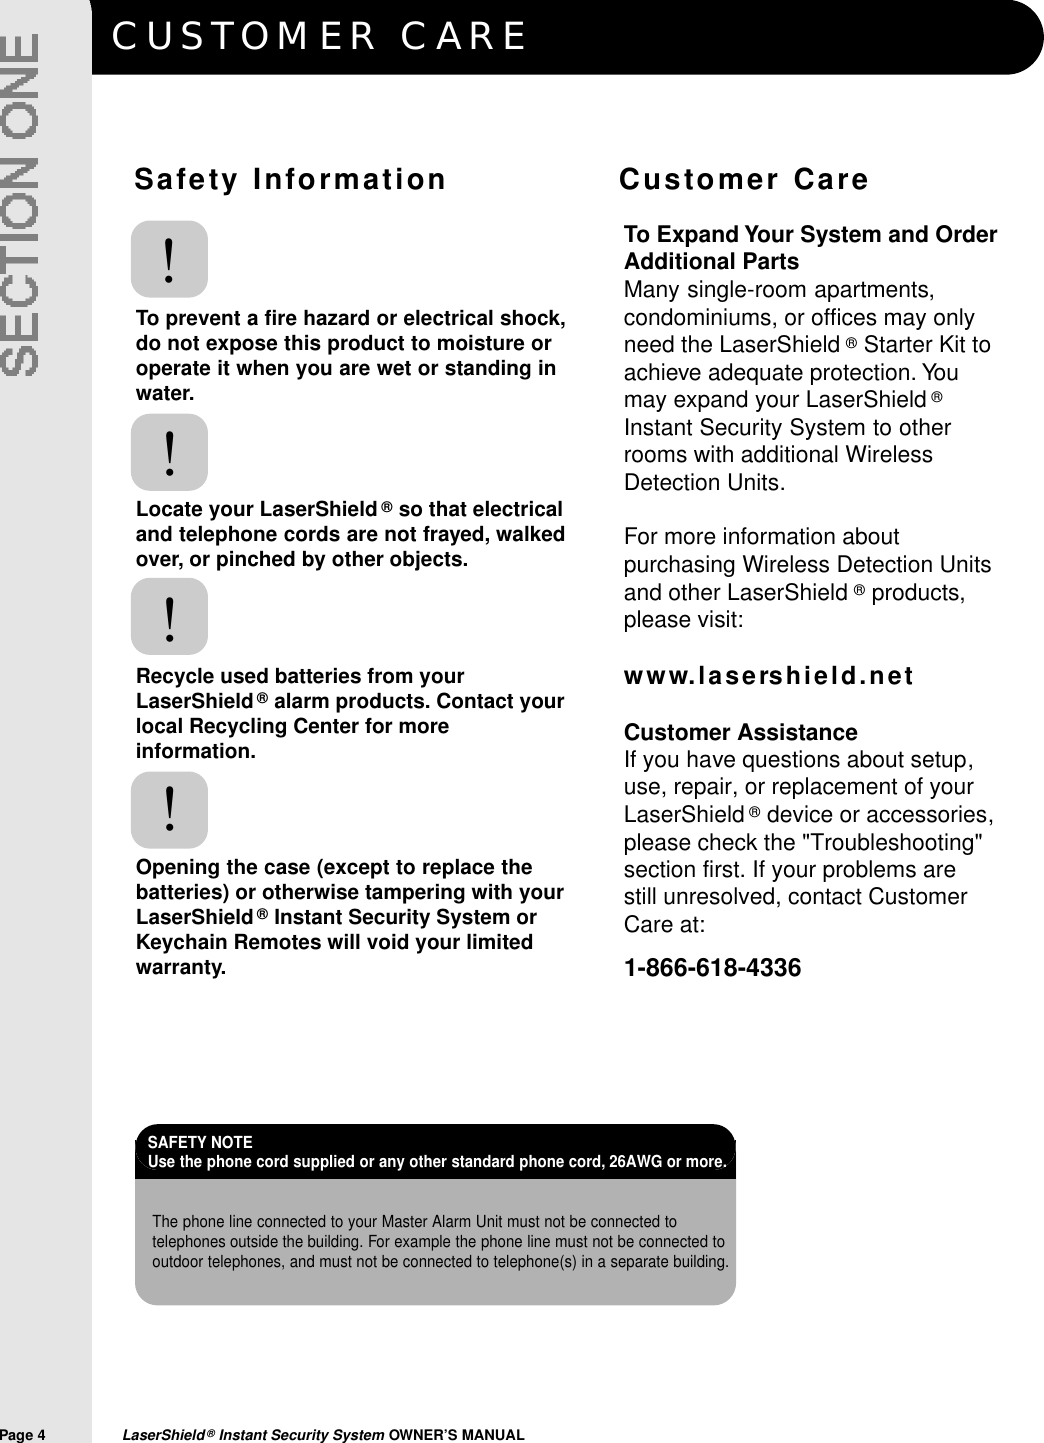 CUSTOMER CAREPage 4  LaserShield®Instant Security System OWNER’S MANUALS a f ety Information               Customer CareTo prevent a fire hazard or electrical shock,do not expose this product to moisture oroperate it when you are wet or standing inwater.Locate your LaserShield ®so that electricaland telephone cords are not frayed, walkedover, or pinched by other objects.Recycle used batteries from yourLaserShield®alarm products. Contact yourlocal Recycling Center for moreinformation.Opening the case (except to replace thebatteries) or otherwise tampering with yourLaserShield®Instant Security System orKeychain Remotes will void your limitedwarranty.!!!!To Expand Your System and OrderAdditional PartsMany single-room apartments,condominiums, or offices may onlyneed the LaserShield ®Starter Kit toachieve adequate protection. Youmay expand your LaserShield ®Instant Security System to otherrooms with additional WirelessDetection Units.For more information aboutpurchasing Wireless Detection Unitsand other LaserShield ®products,please visit:w w w. l a s e rs h i e l d . n e tCustomer AssistanceIf you have questions about setup,use, repair, or replacement of yourLaserShield ®device or accessories,please check the &quot;Troubleshooting&quot;section first. If your problems are still unresolved, contact CustomerCare at:1-866-618-4336The phone line connected to your Master Alarm Unit must not be connected totelephones outside the building. For example the phone line must not be connected tooutdoor telephones, and must not be connected to telephone(s) in a separate building.SAFETY NOTE Use the phone cord supplied or any other standard phone cord, 26AWG or more.